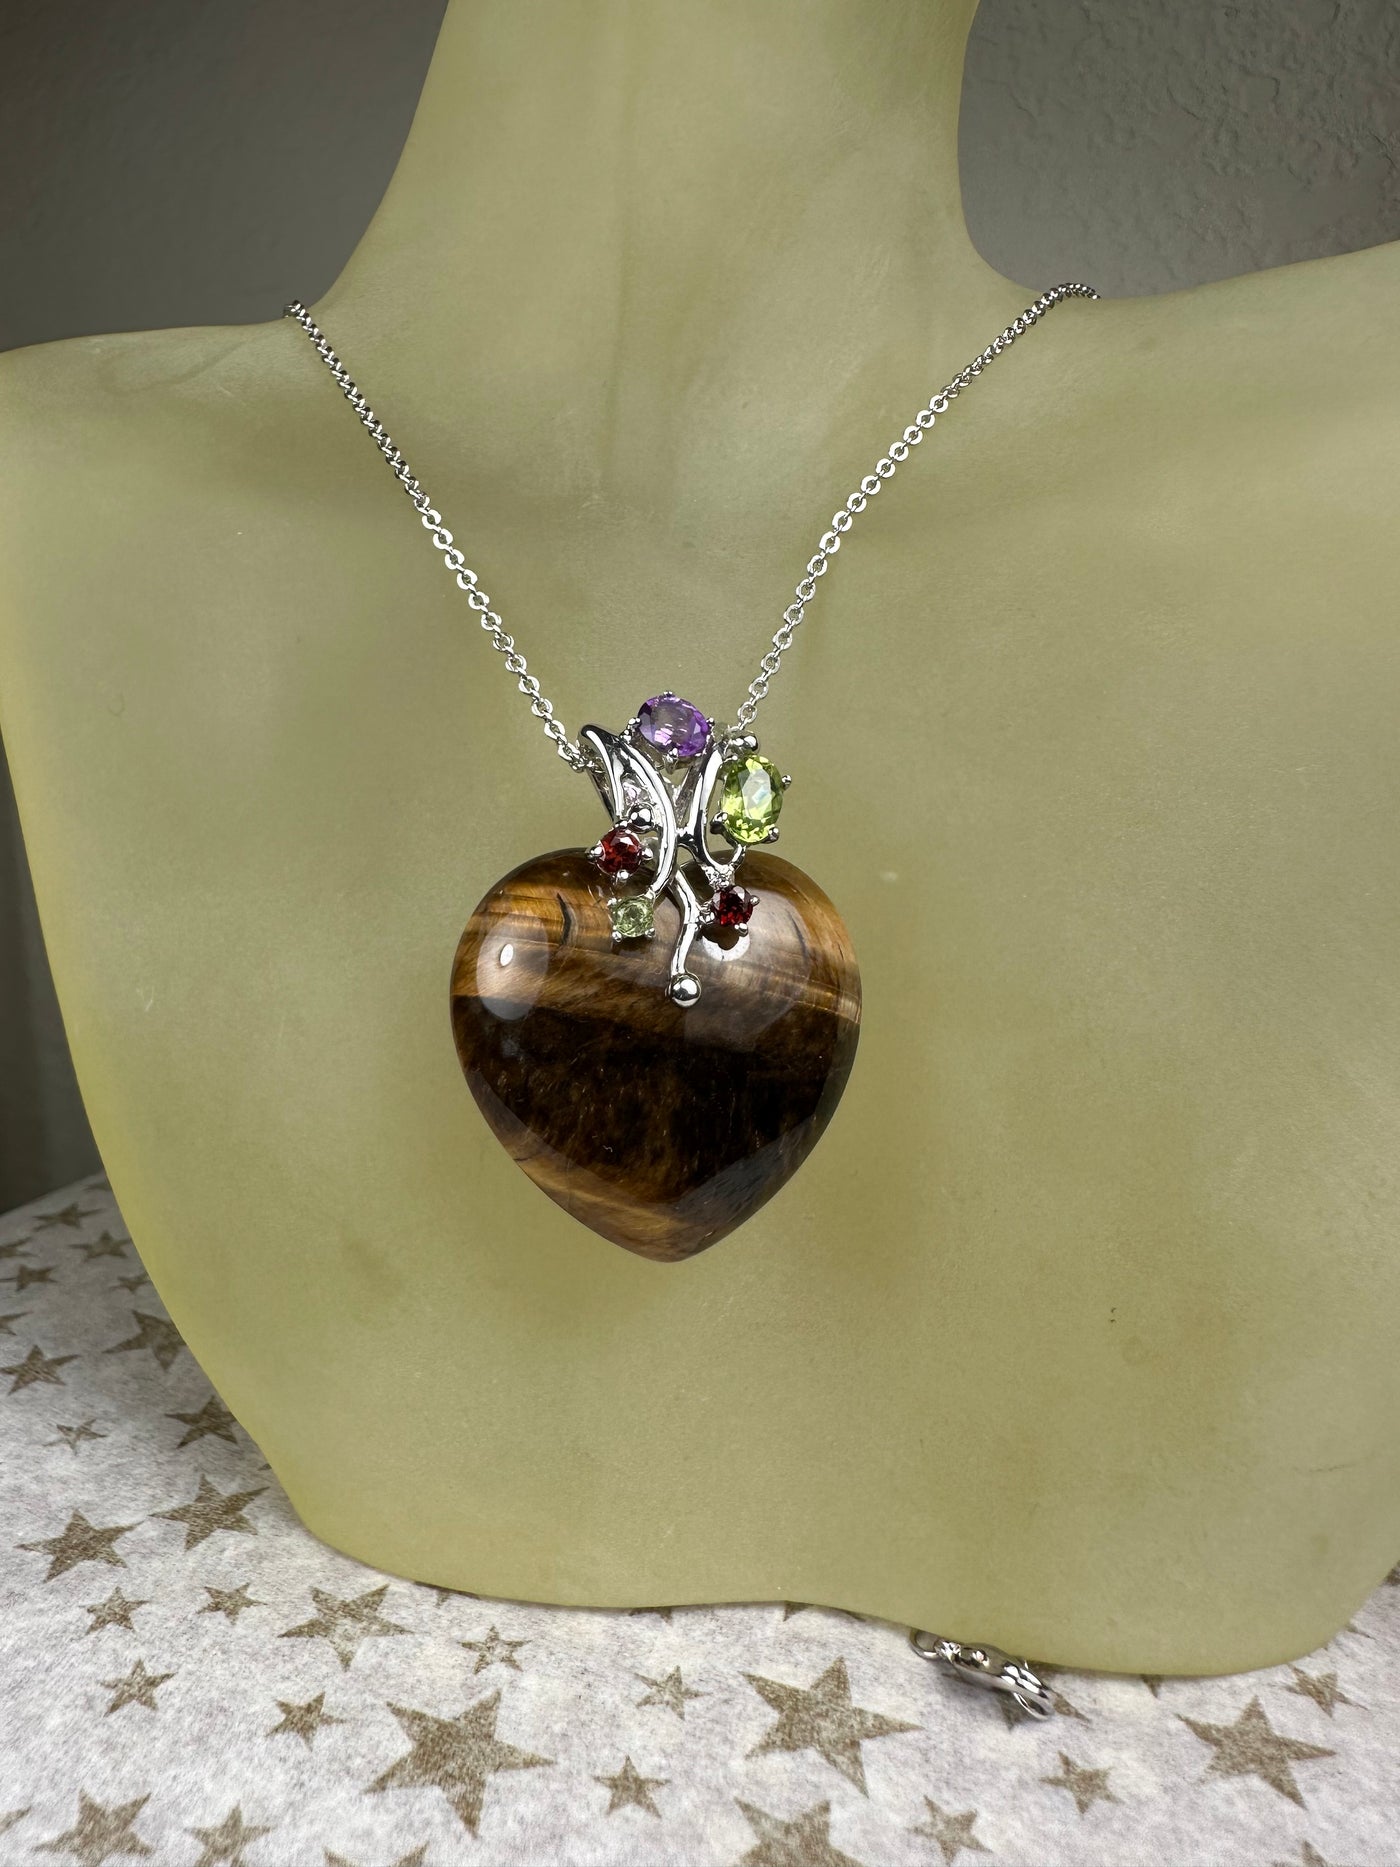 Tiger's Eye Heart and Gems Pendant in Sterling Silver